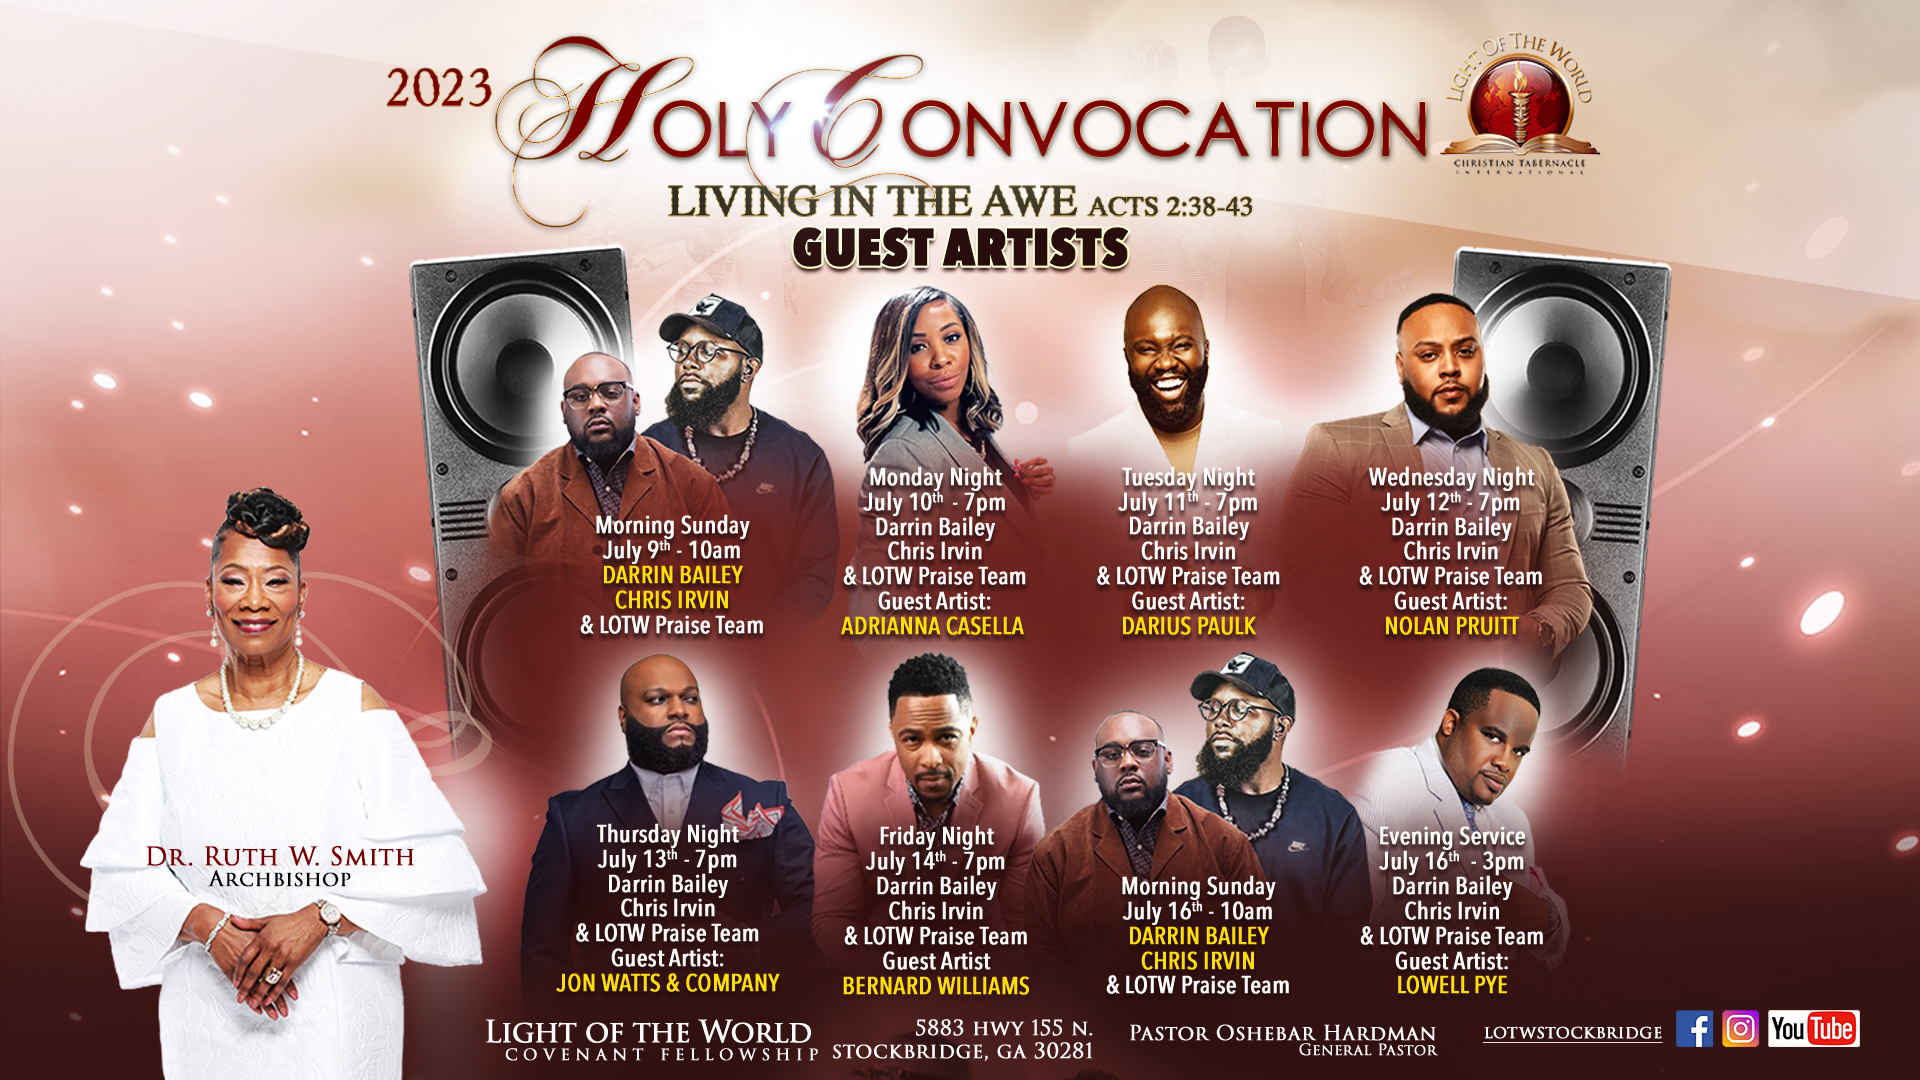 2023 Holy convocation guest artists flyer